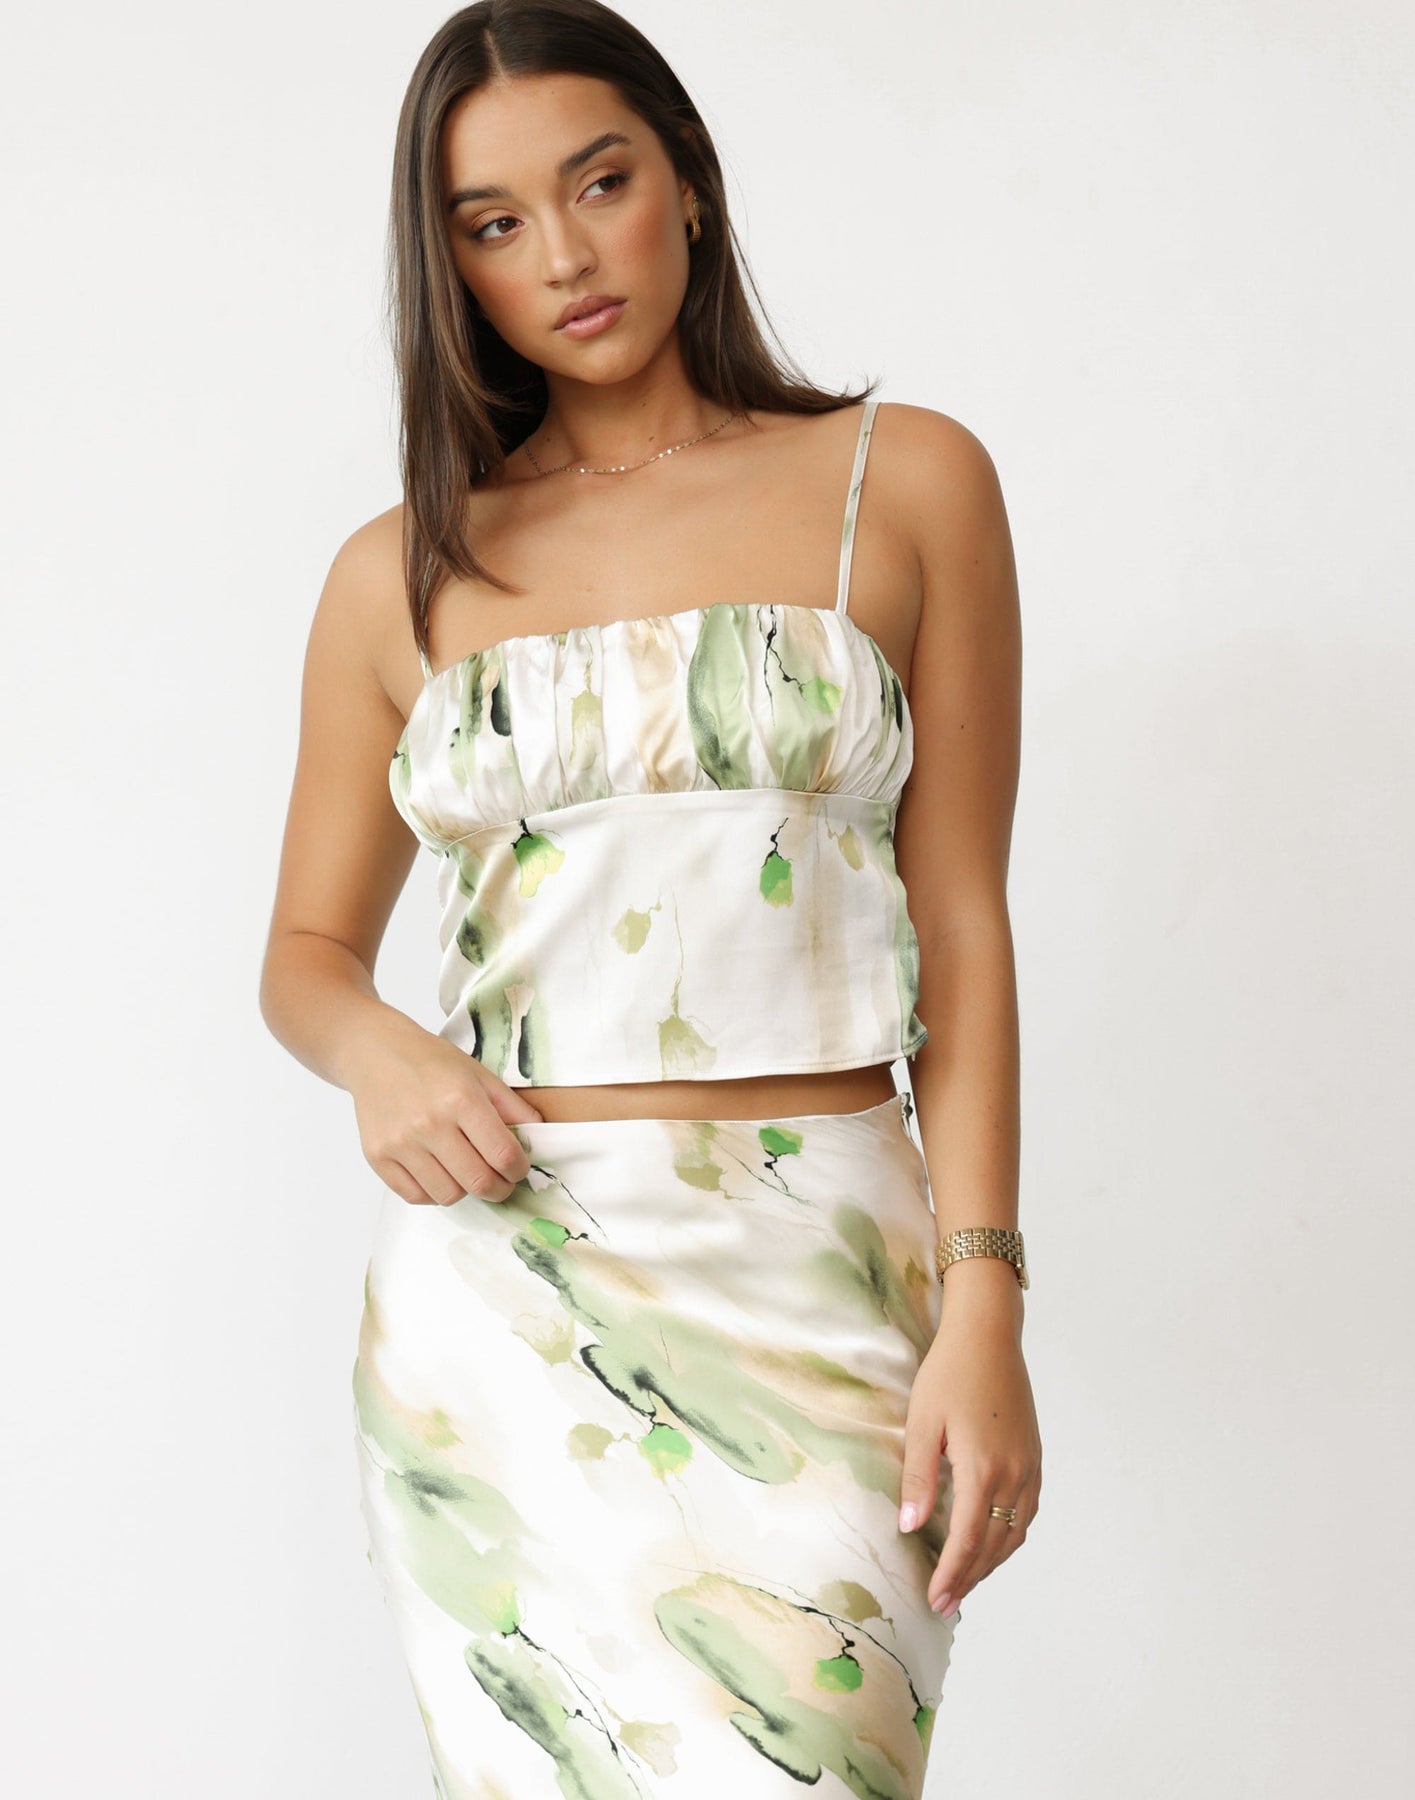 Collective Tops - Adoette Cami Top (Water Lily)
                Add to wishlist fourth image